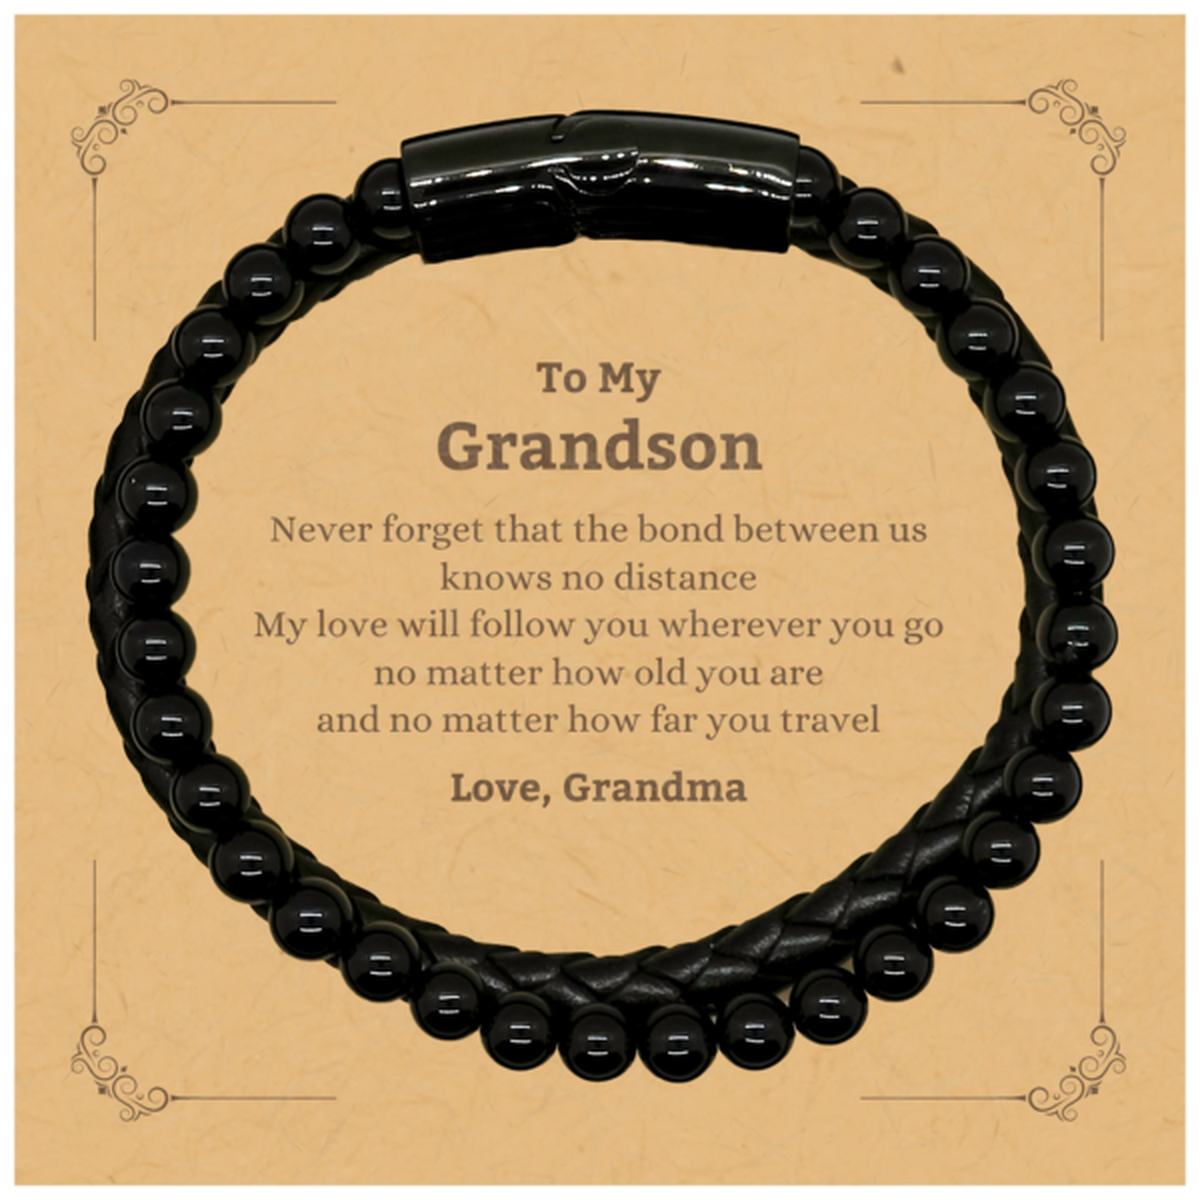 Grandson Birthday Gifts from Grandma, Adjustable Stone Leather Bracelets for Grandson Christmas Graduation Unique Gifts Grandson Never forget that the bond between us knows no distance. Love, Grandma